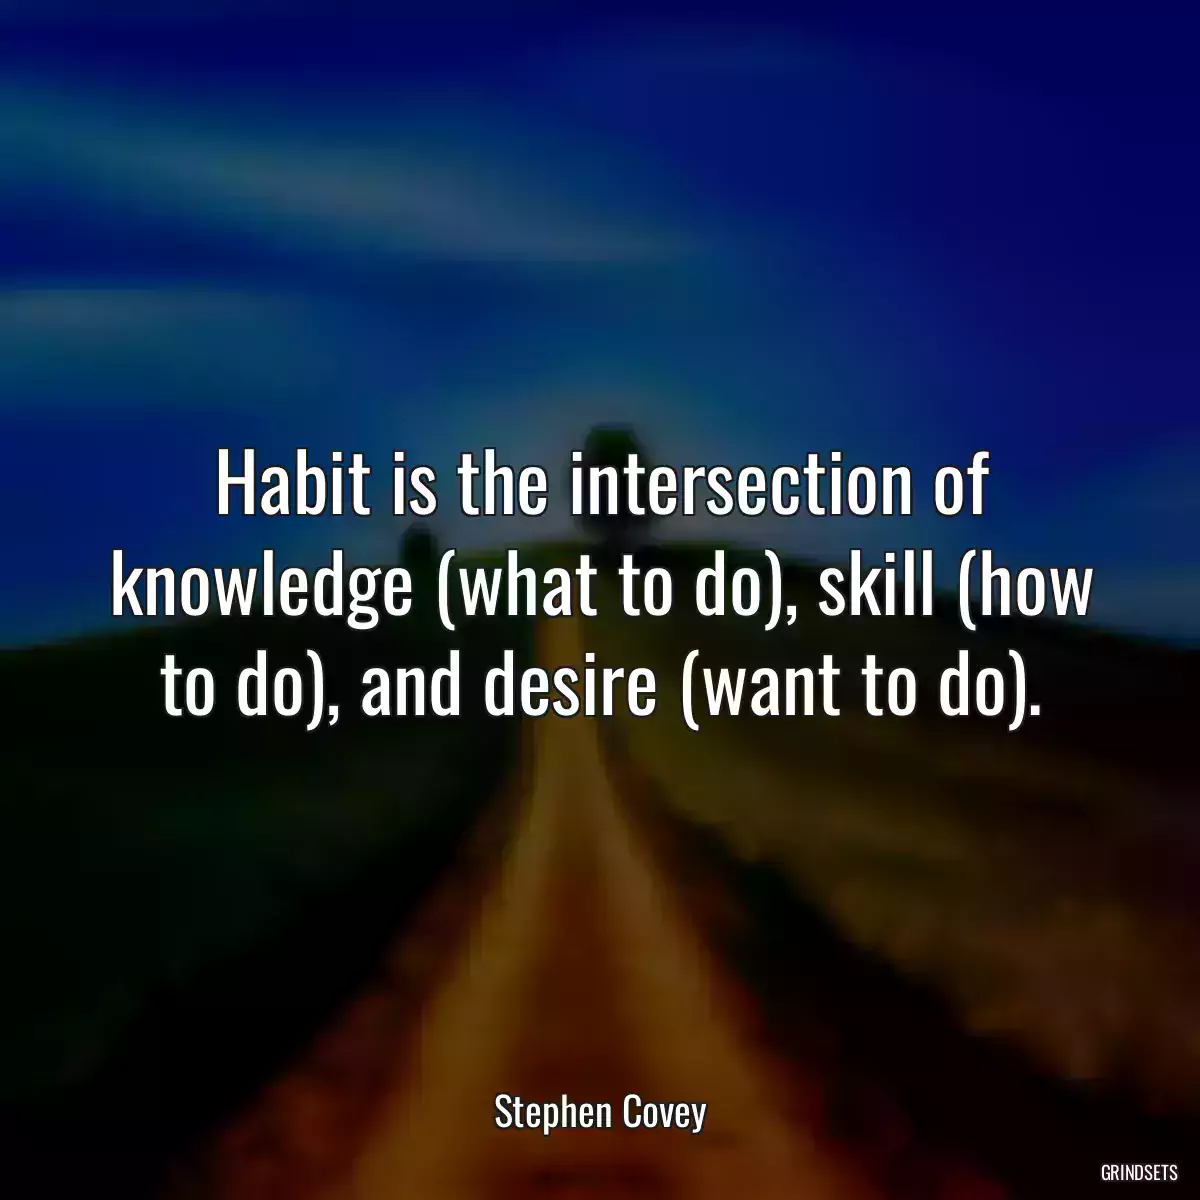 Habit is the intersection of knowledge (what to do), skill (how to do), and desire (want to do).